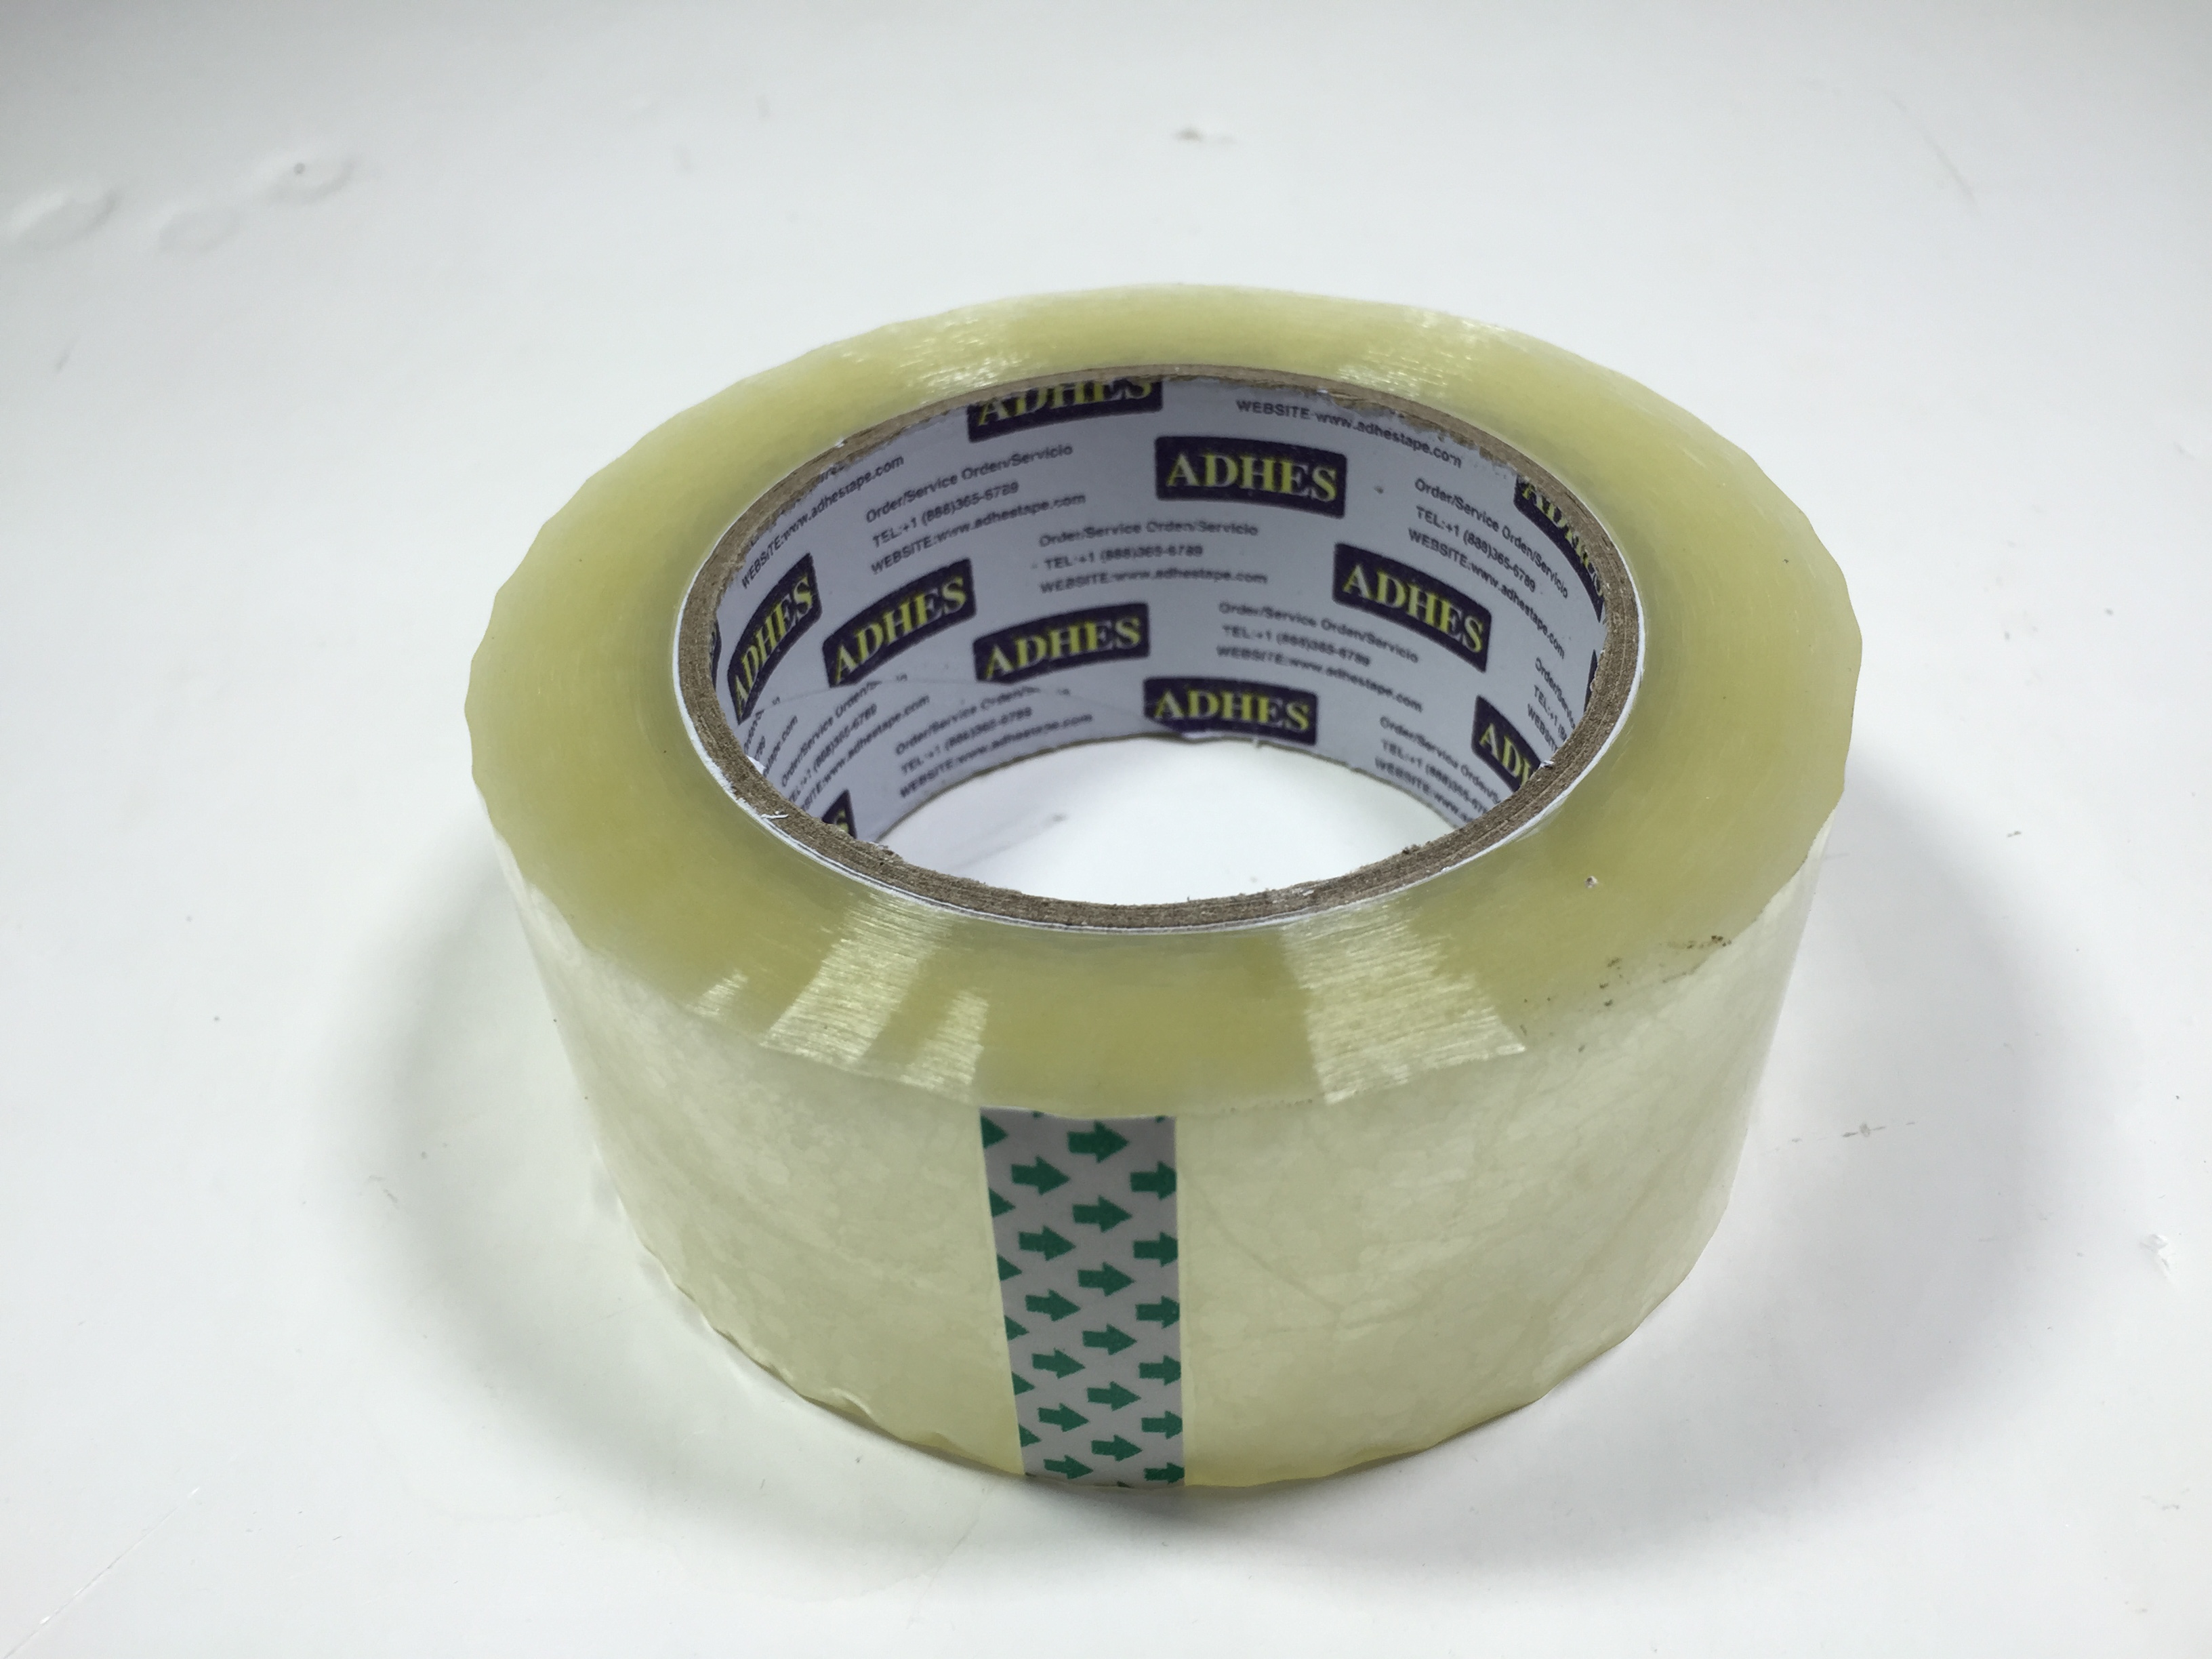 Download Clear/Brown Sealing Tape Carton Packing Box Tape 45Y/110Y ...